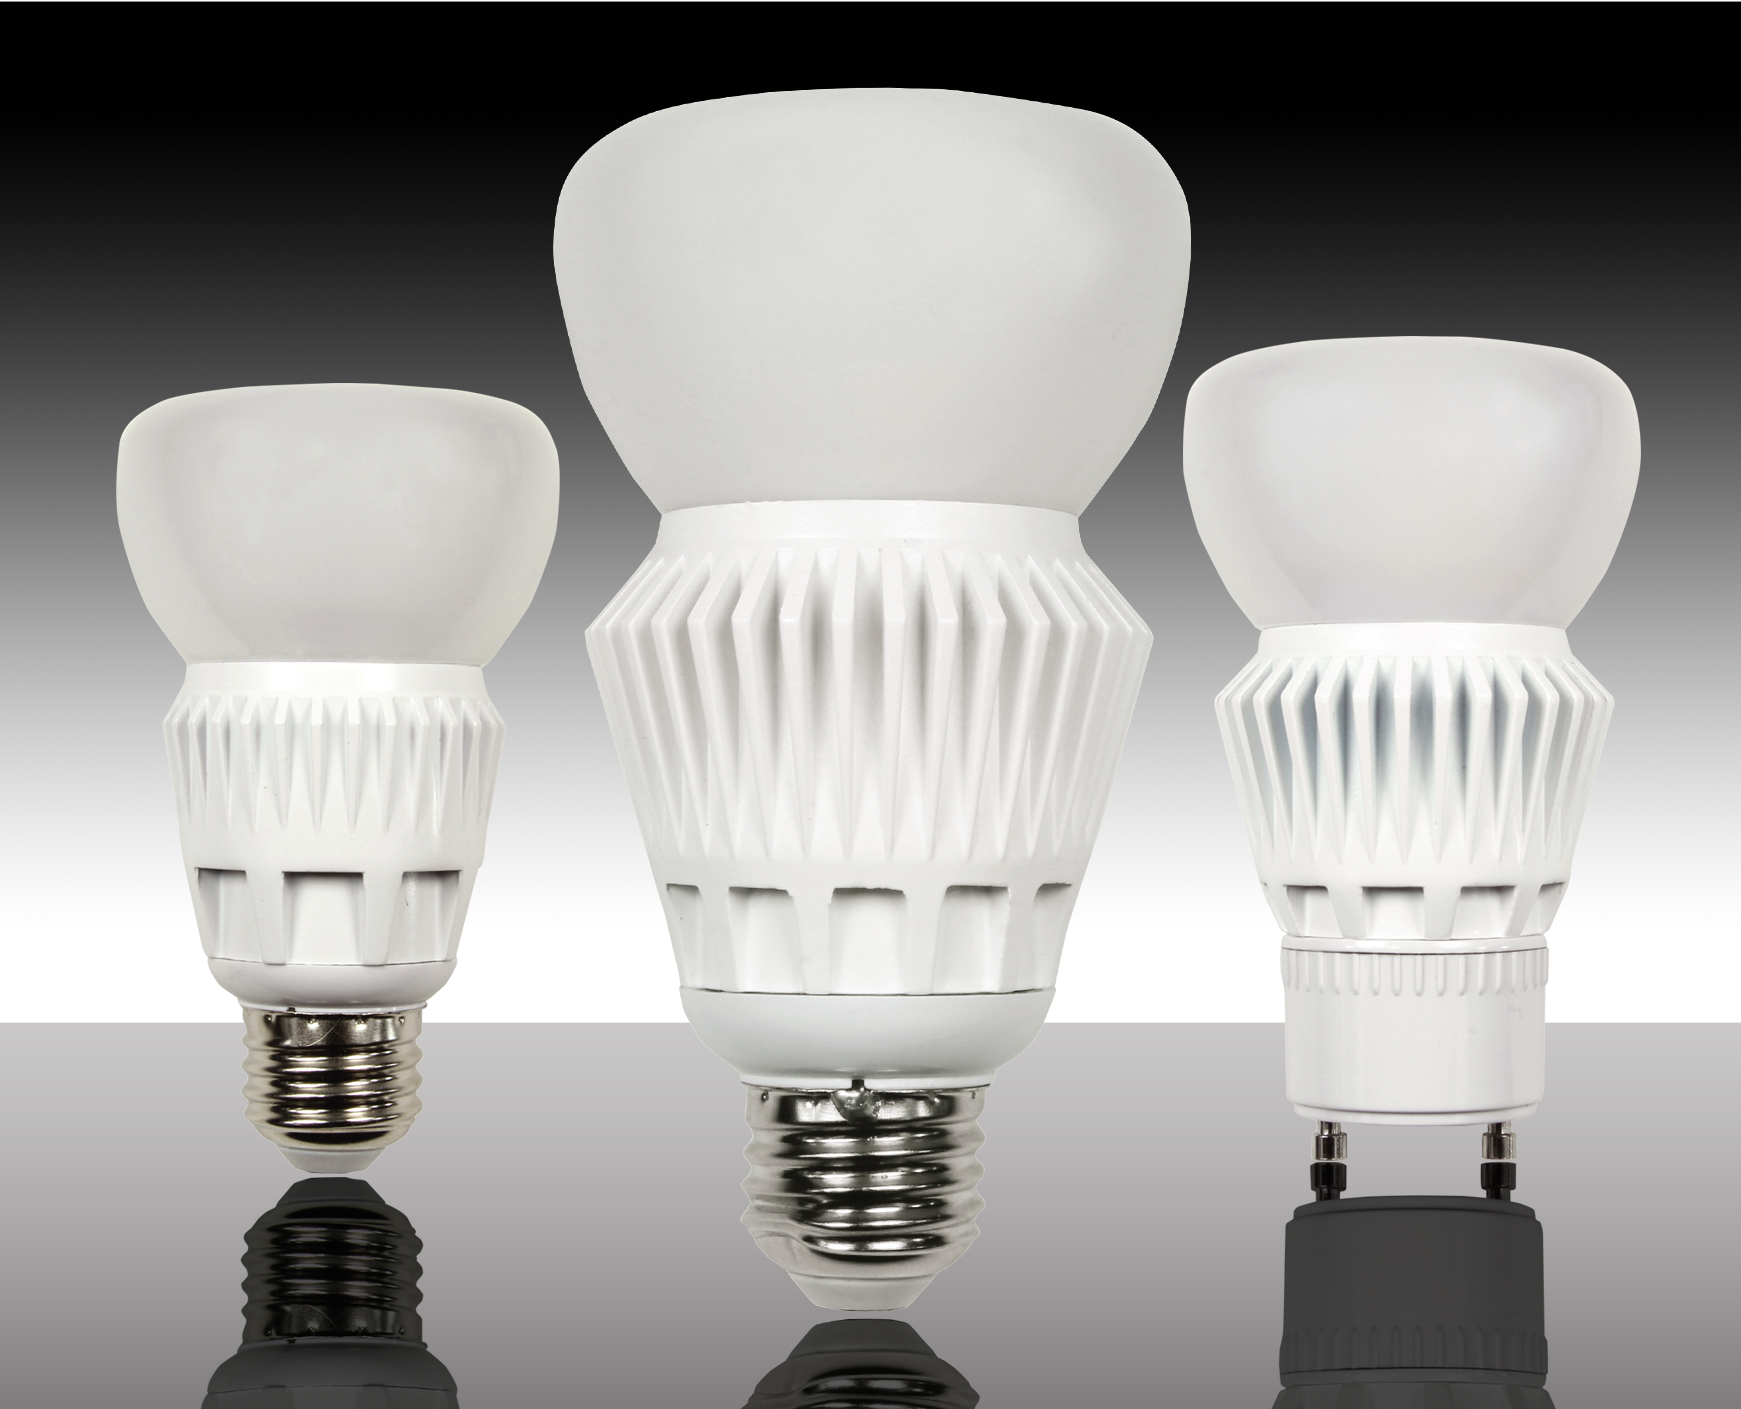 MaxLite Introduces Second Generation LED Omnidirectional A-Line Lamps